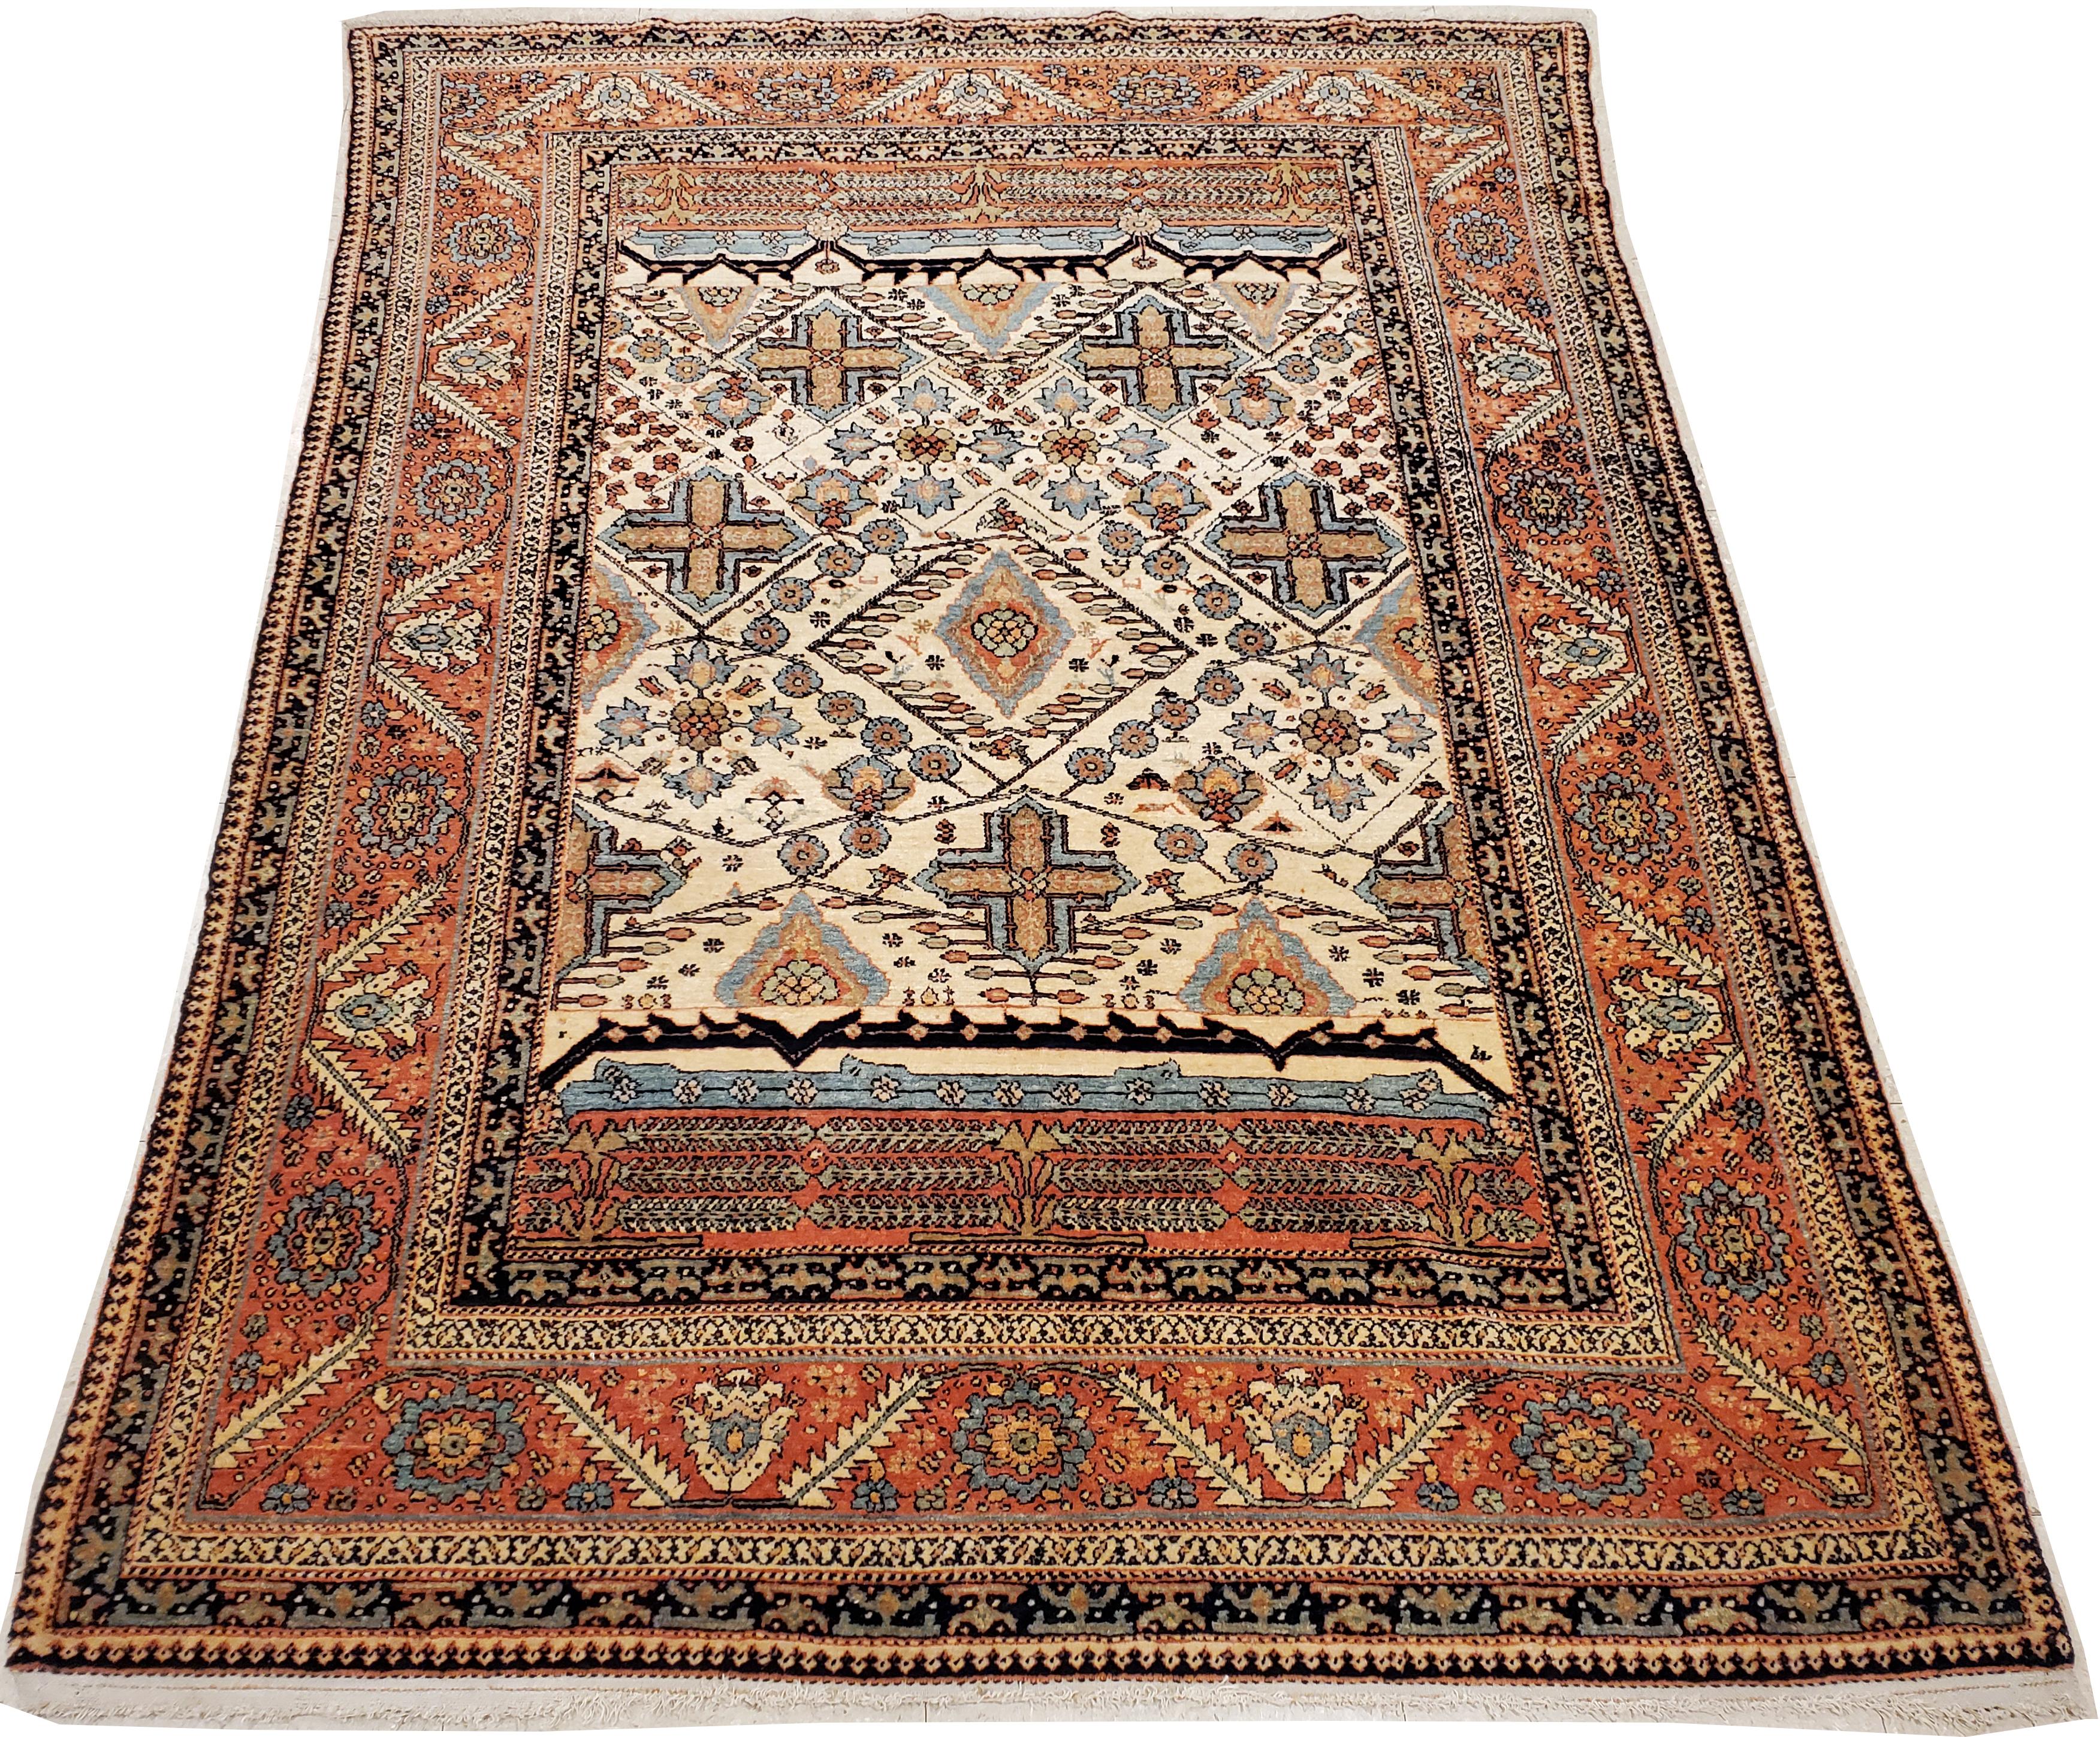 Antique Persian Bakhshaish Carpet, Handmade Wool Rug, Ivory and Rust For Sale 6